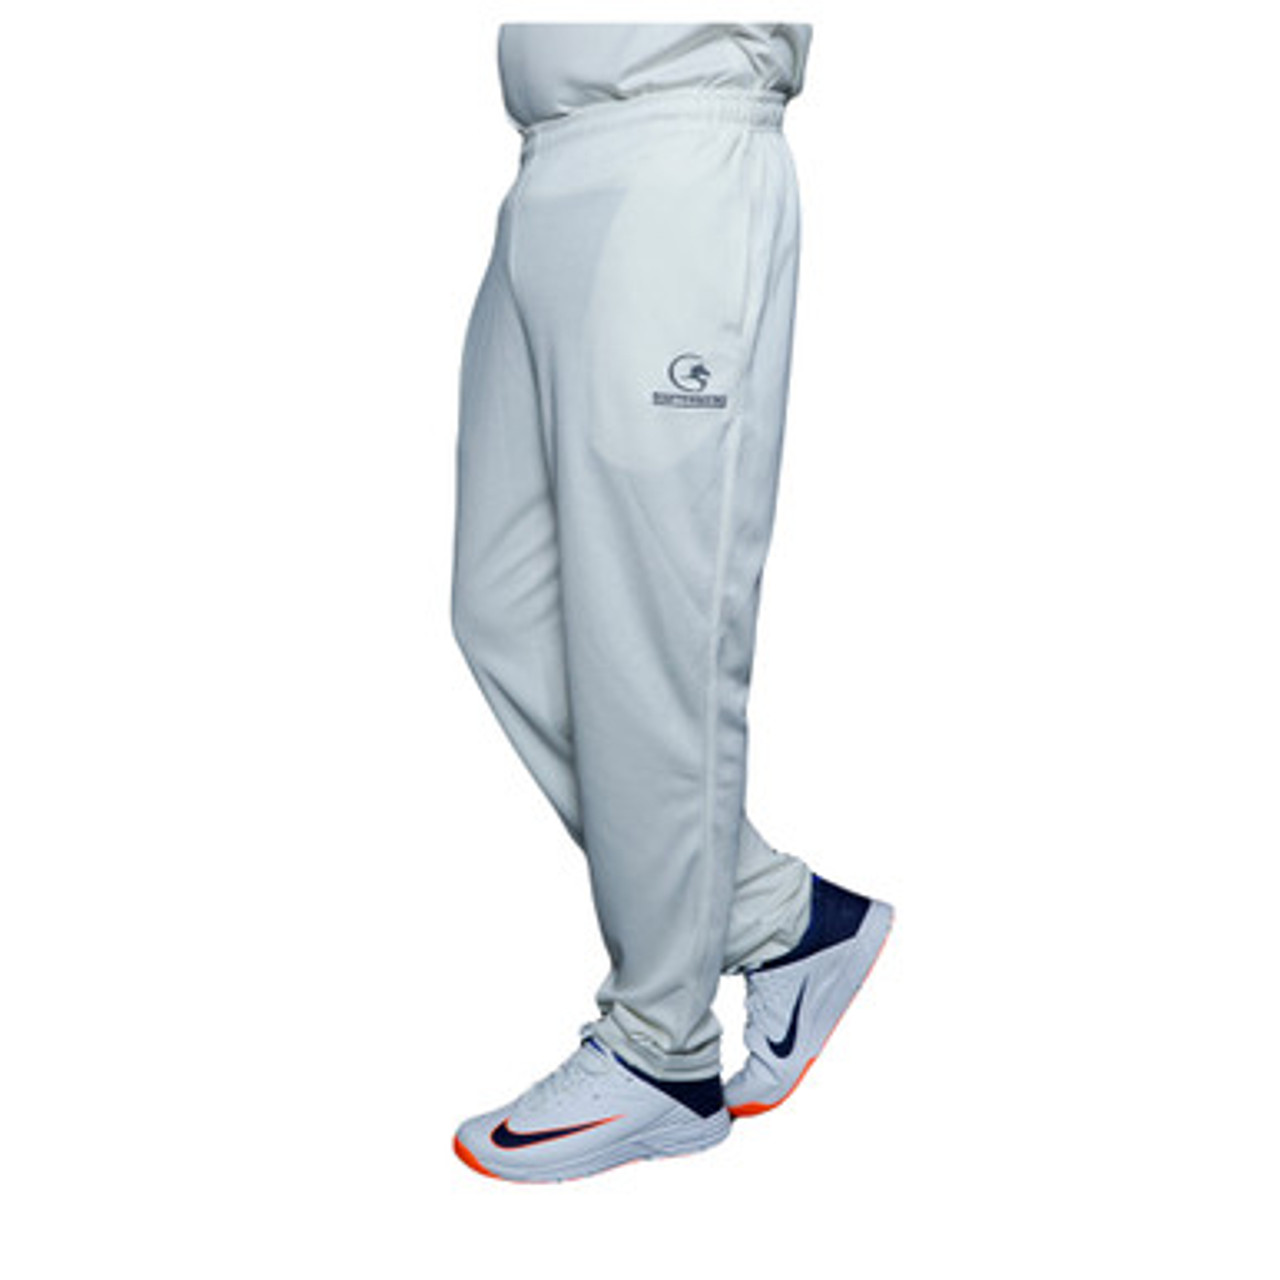 Adidas White core regular cricket pants white at Rs 1750/piece in Thrissur  | ID: 17618722312